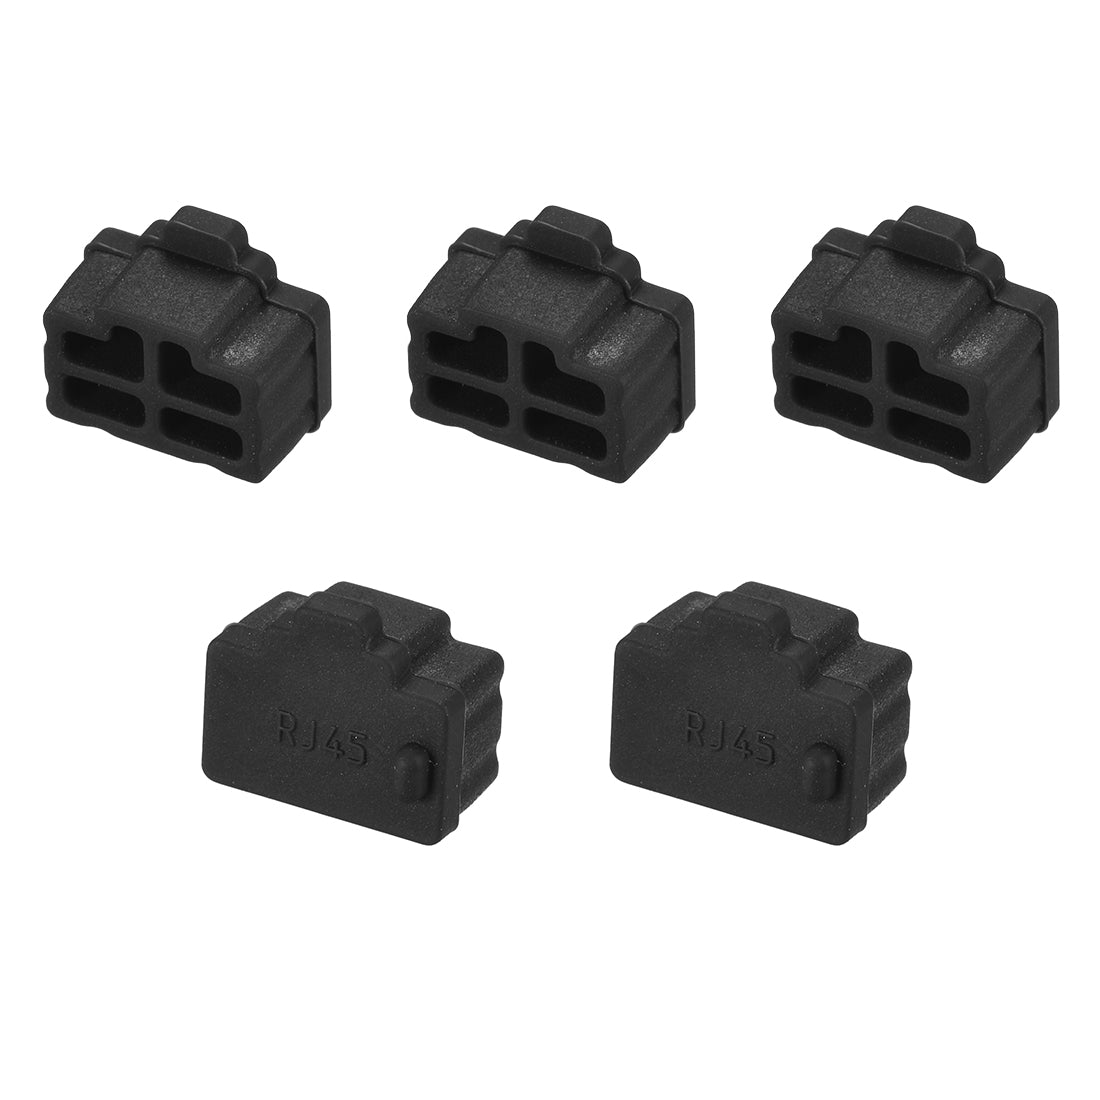 uxcell Uxcell Silicone Ethernet Hub Port RJ45 Anti-Dust Stopper Cap Cover Black 5pcs